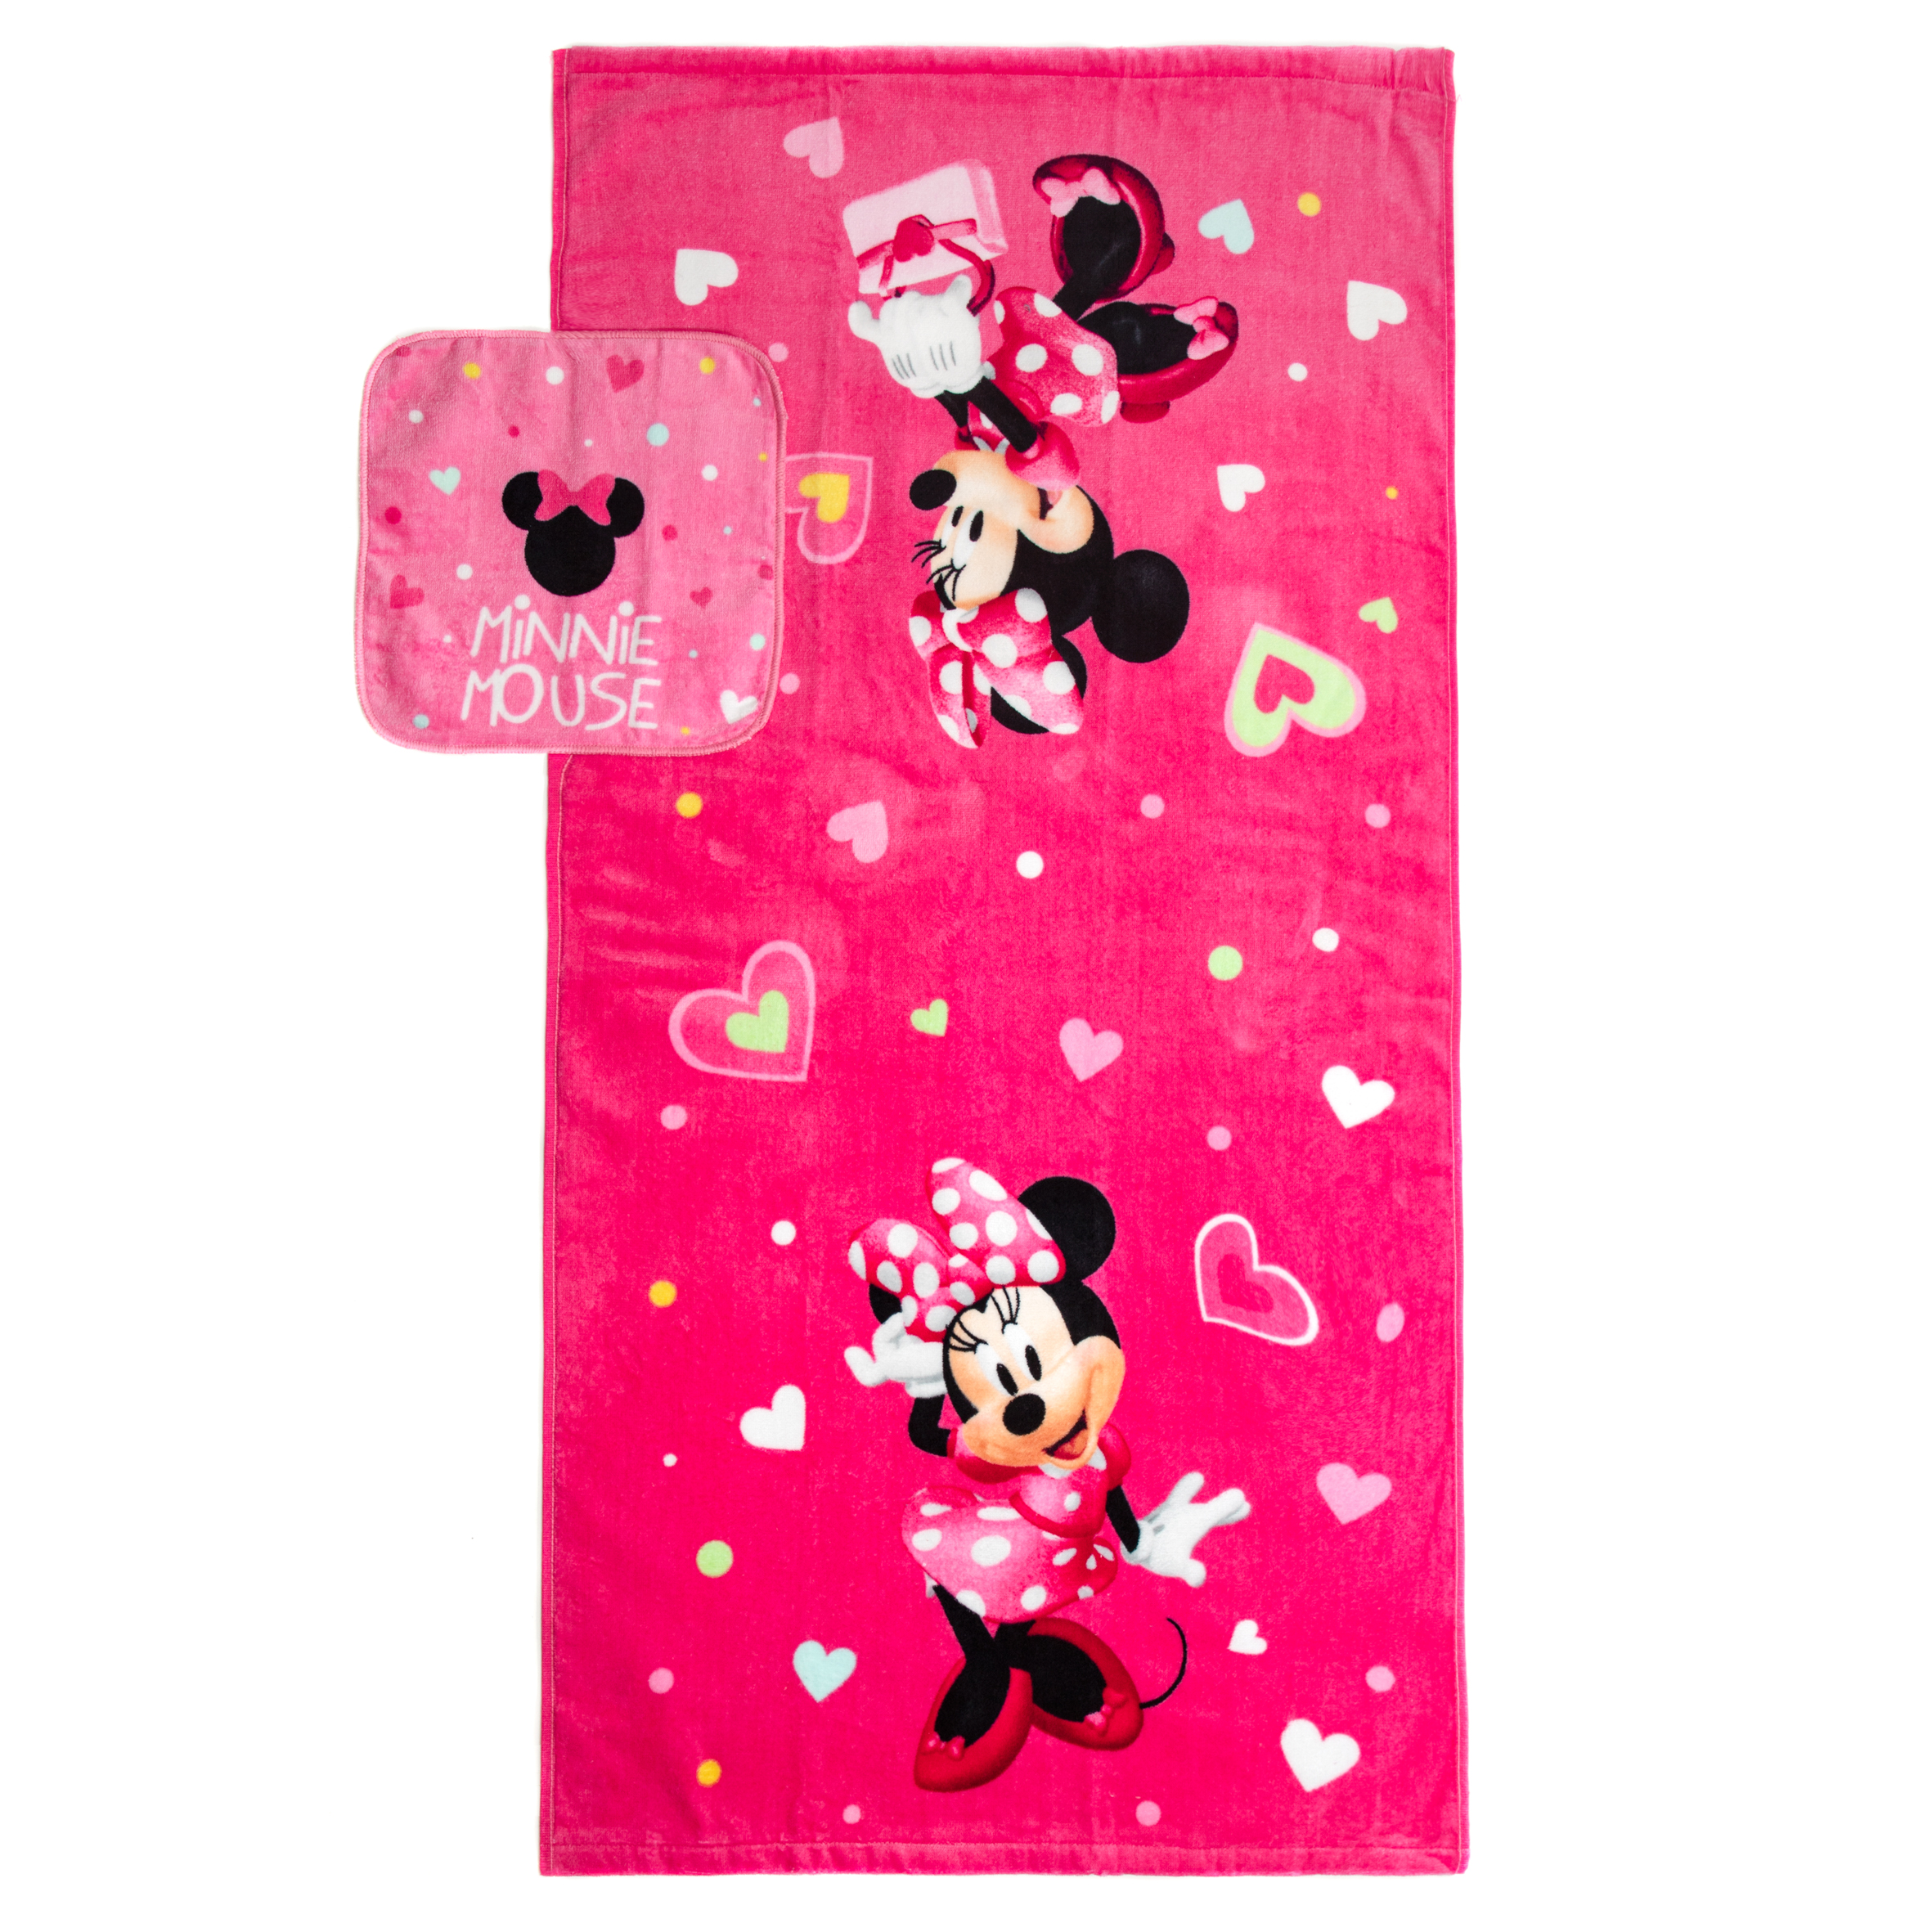 Minnie Mouse Kids Cotton 2 Piece Towel and Washcloth Set - image 1 of 8